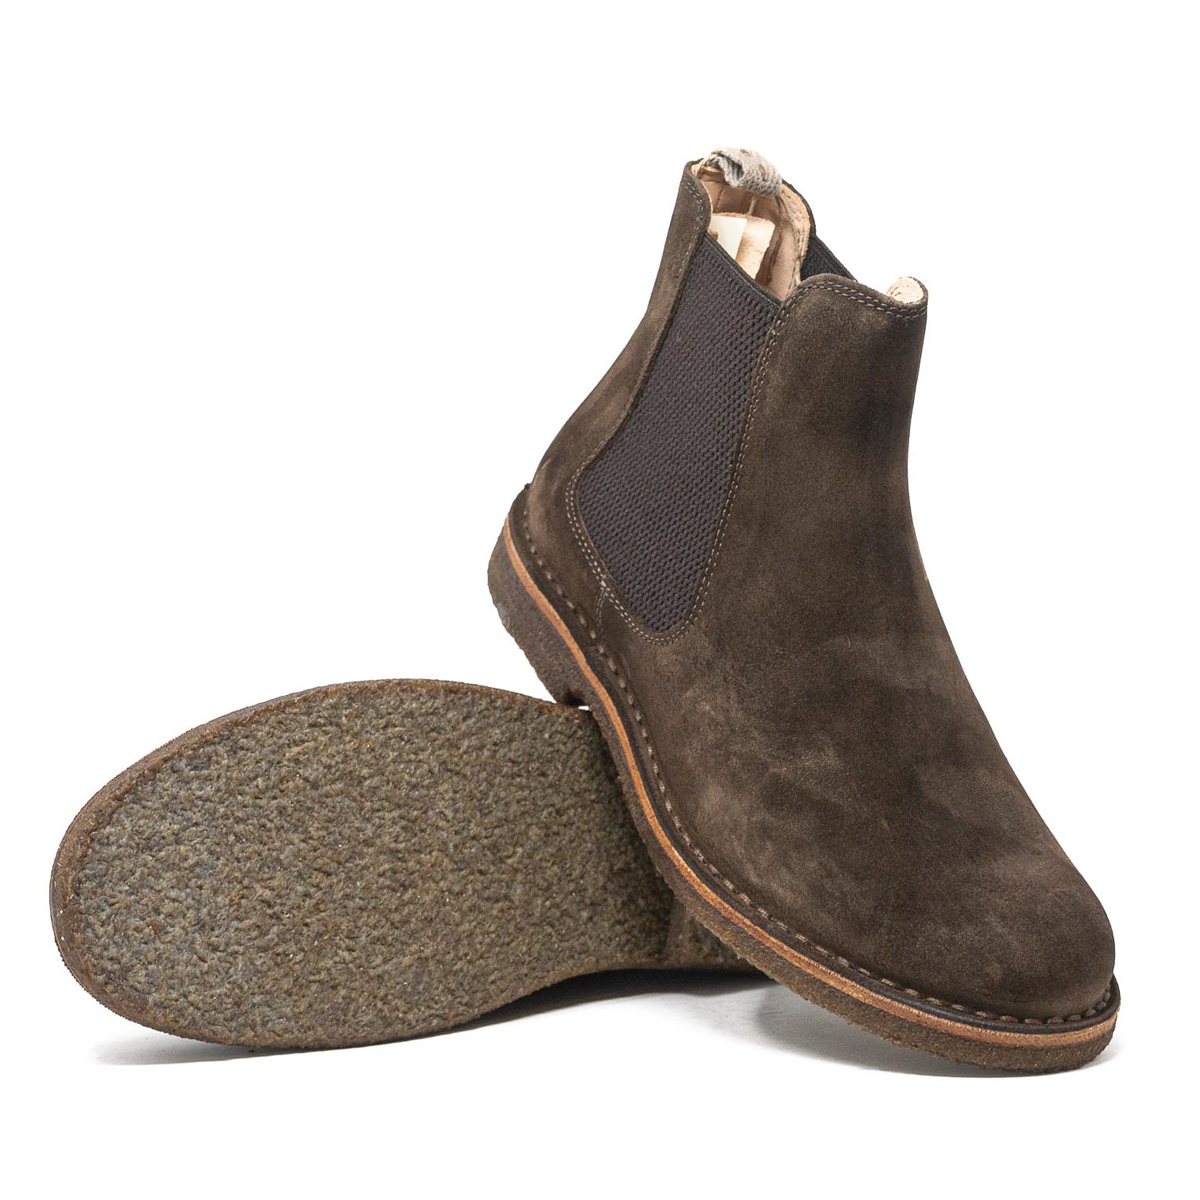 Astorflex Bitflex Chelsea Boot Dark Chestnut, a timeless classic and a must-have for modern shoe enthusiasts